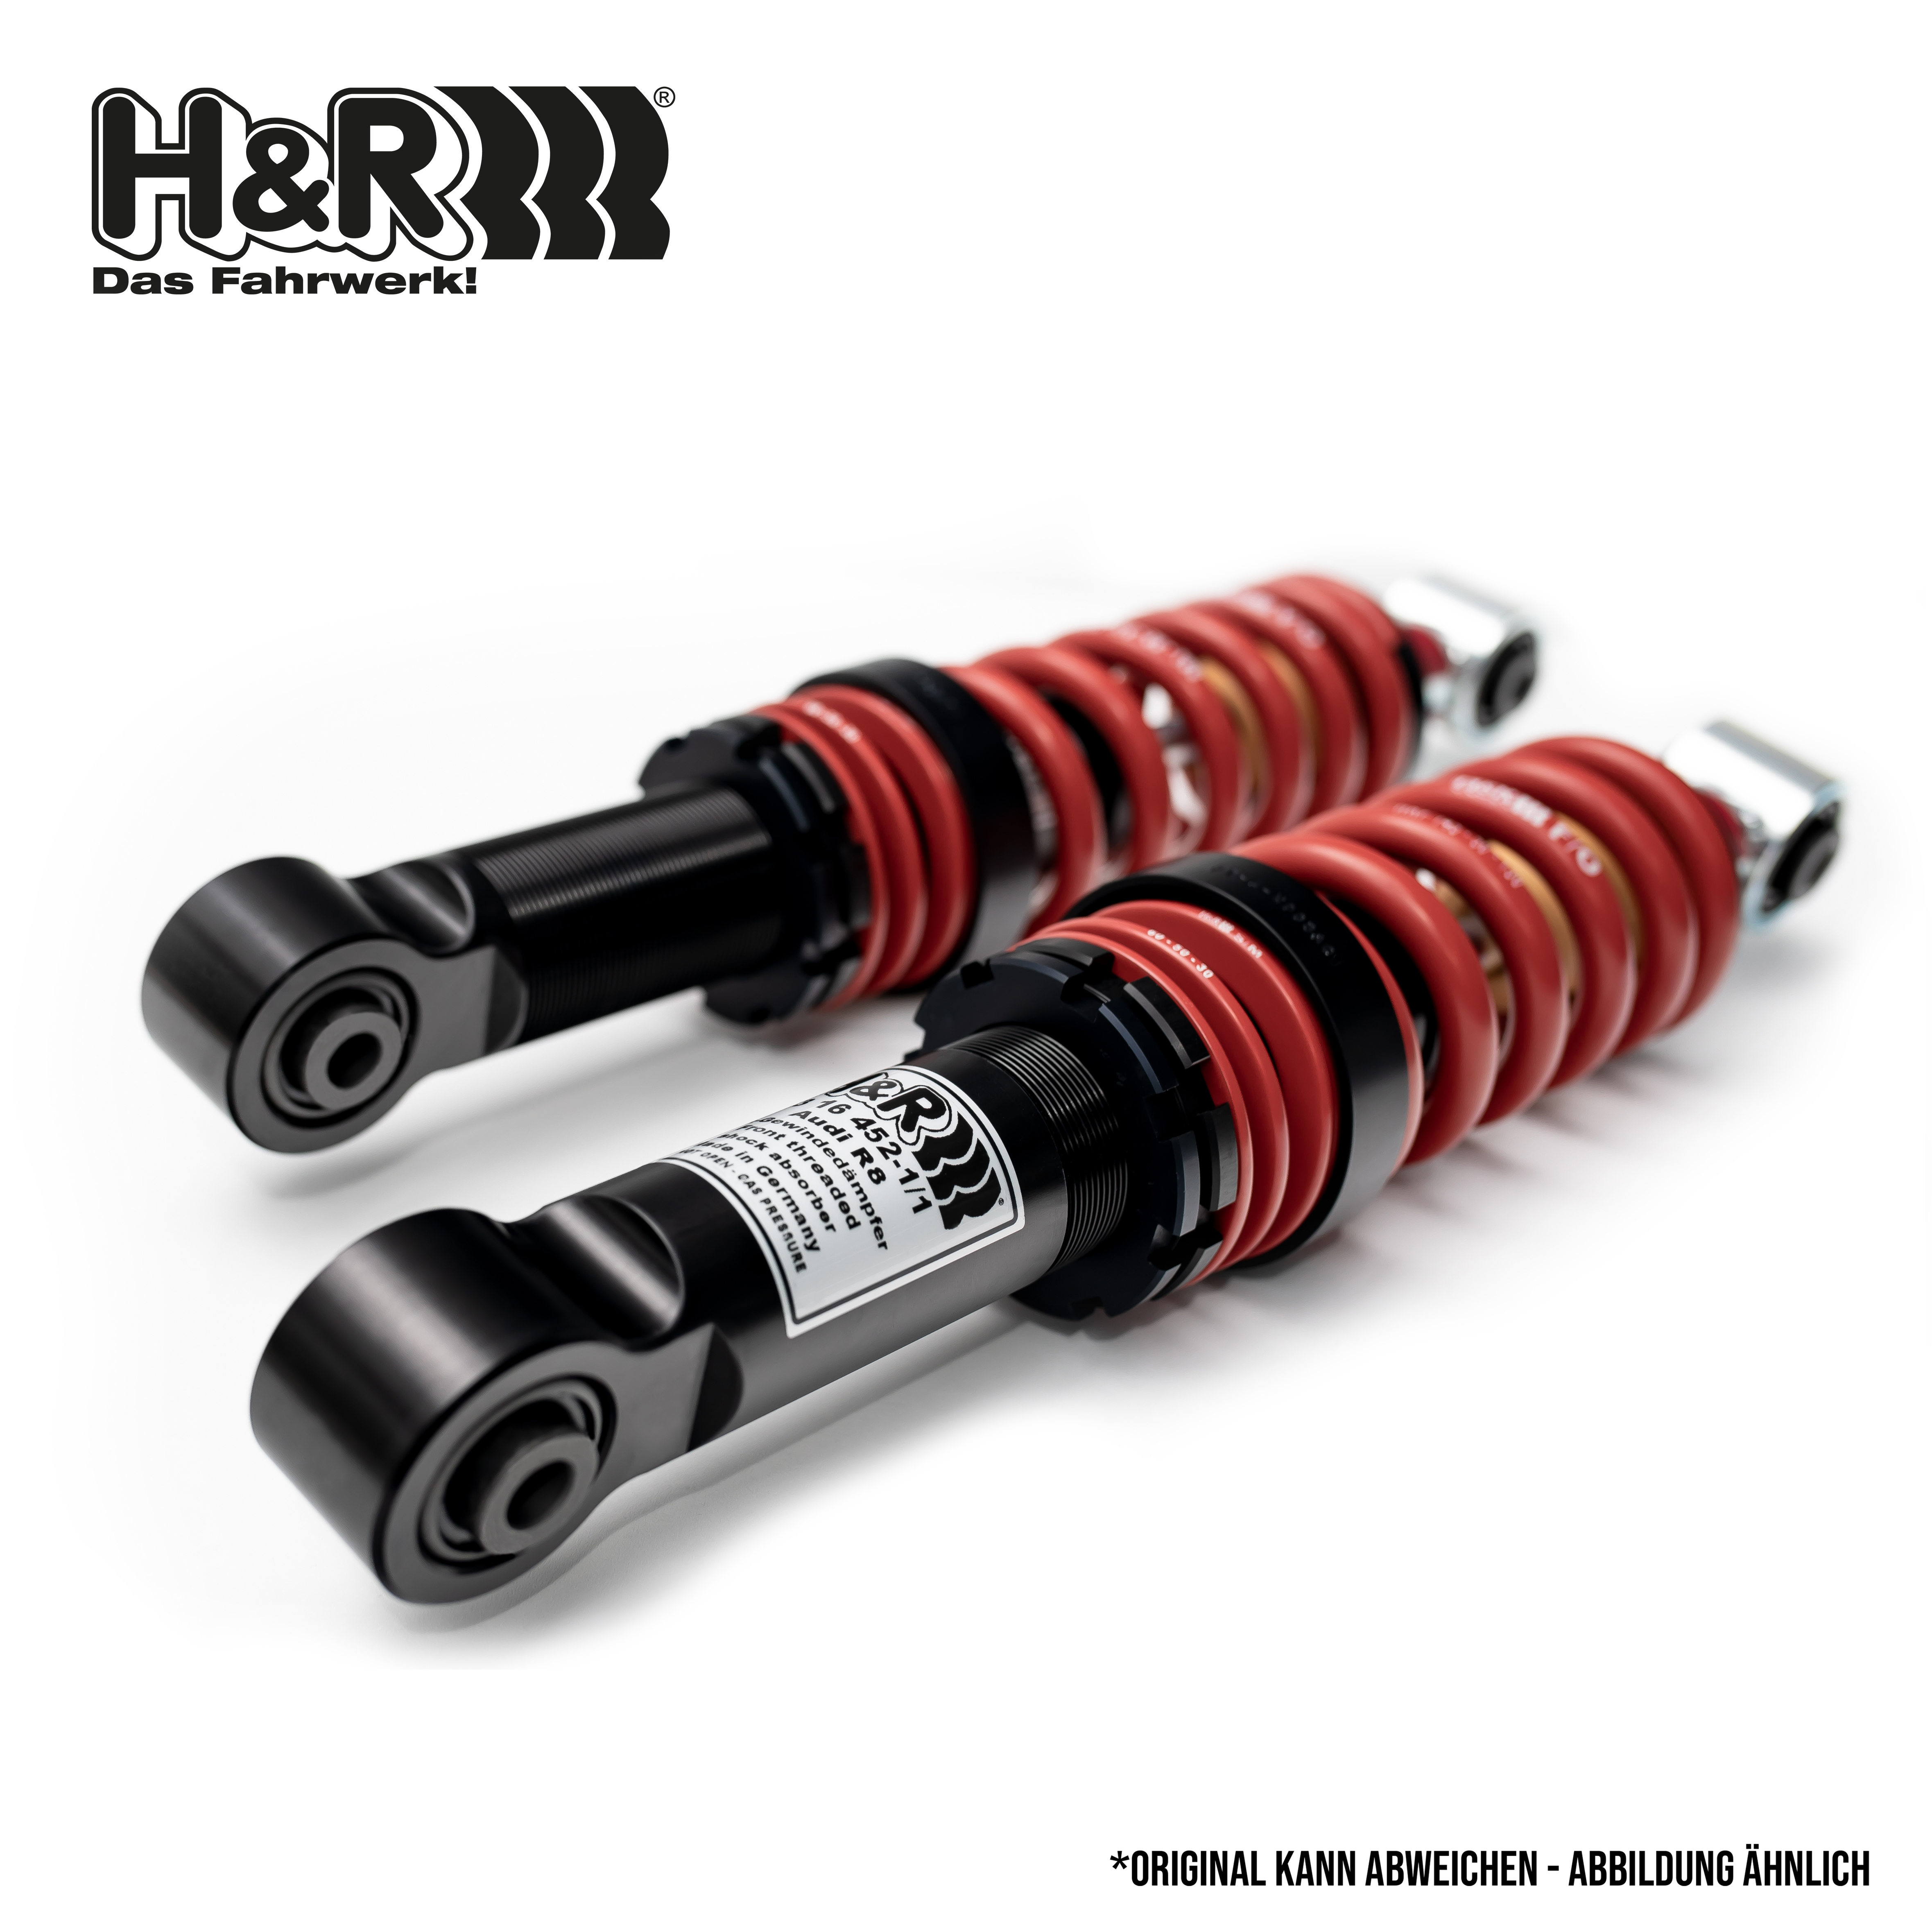 H&R Monotube coilover set R8 Coupe+Spyder Typ 42 aluminium adjustable dampers 2007> 12